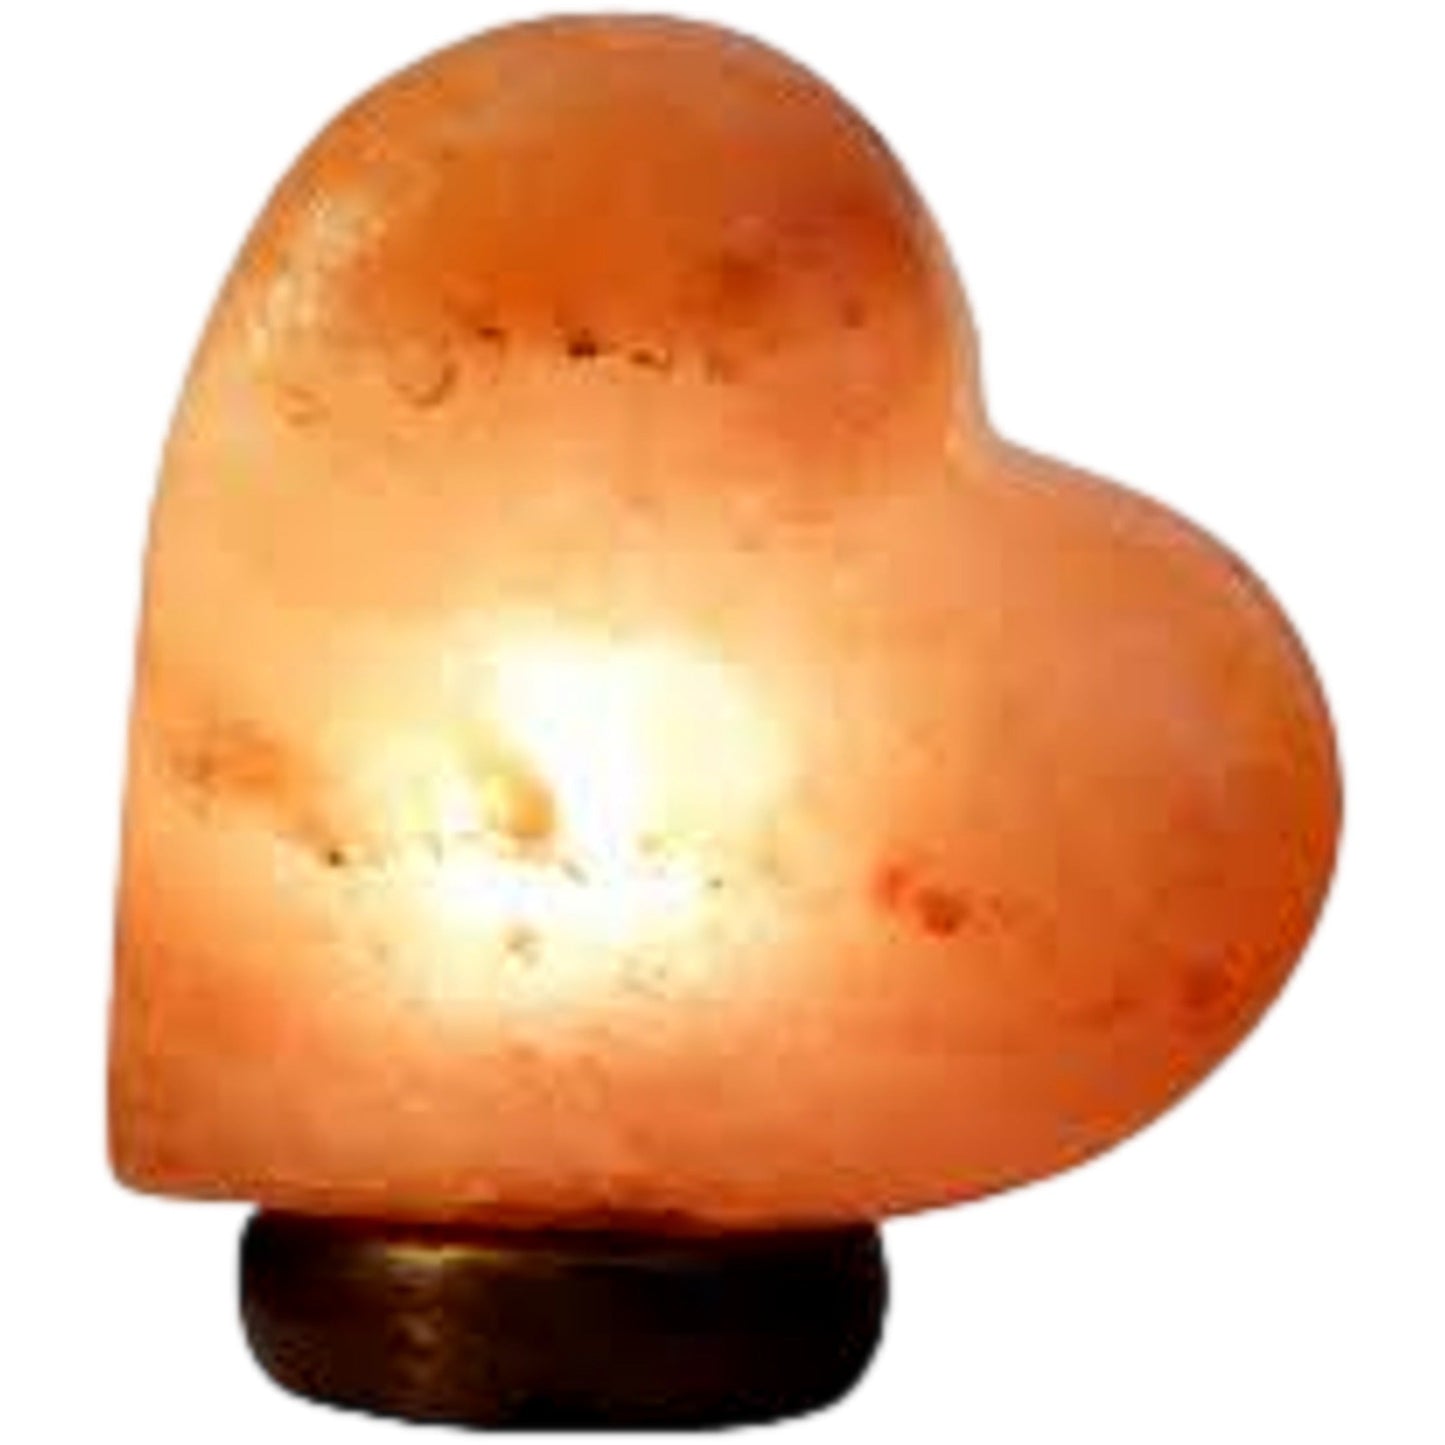 Real Himalayan Salt Lamps - Different Styles